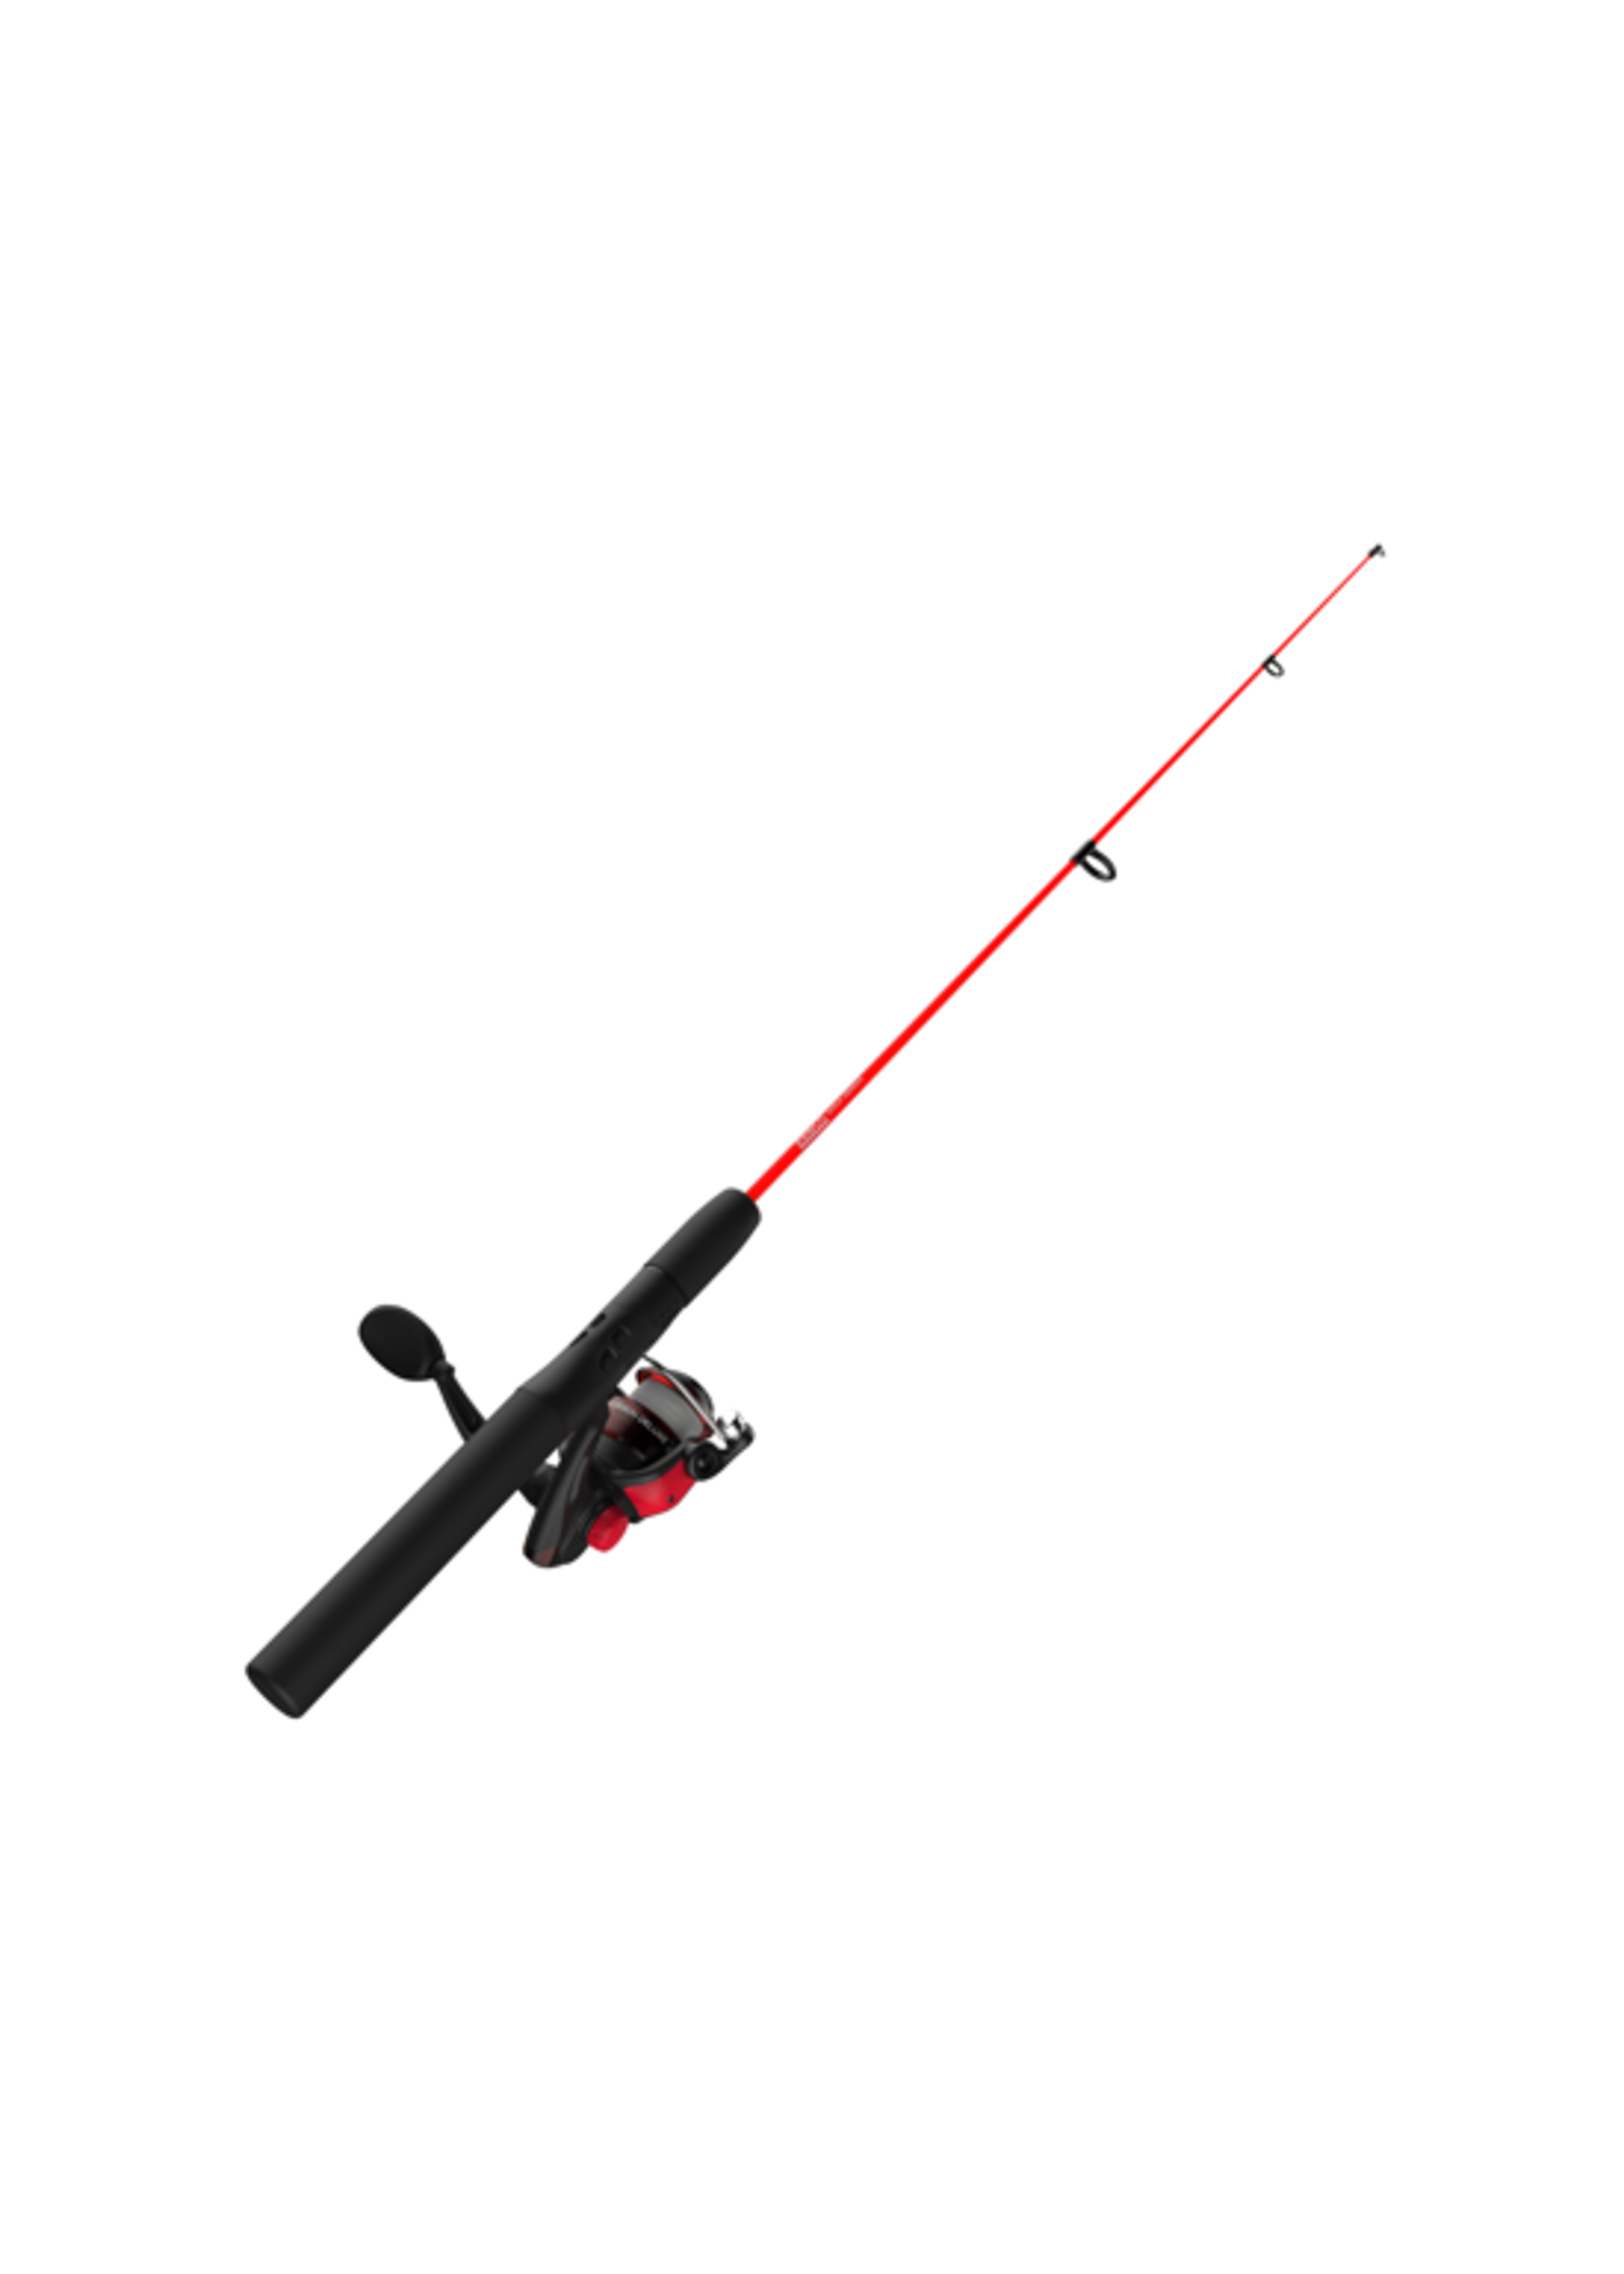 Dock Demon with Closed-Face Reel Combo - Zebco